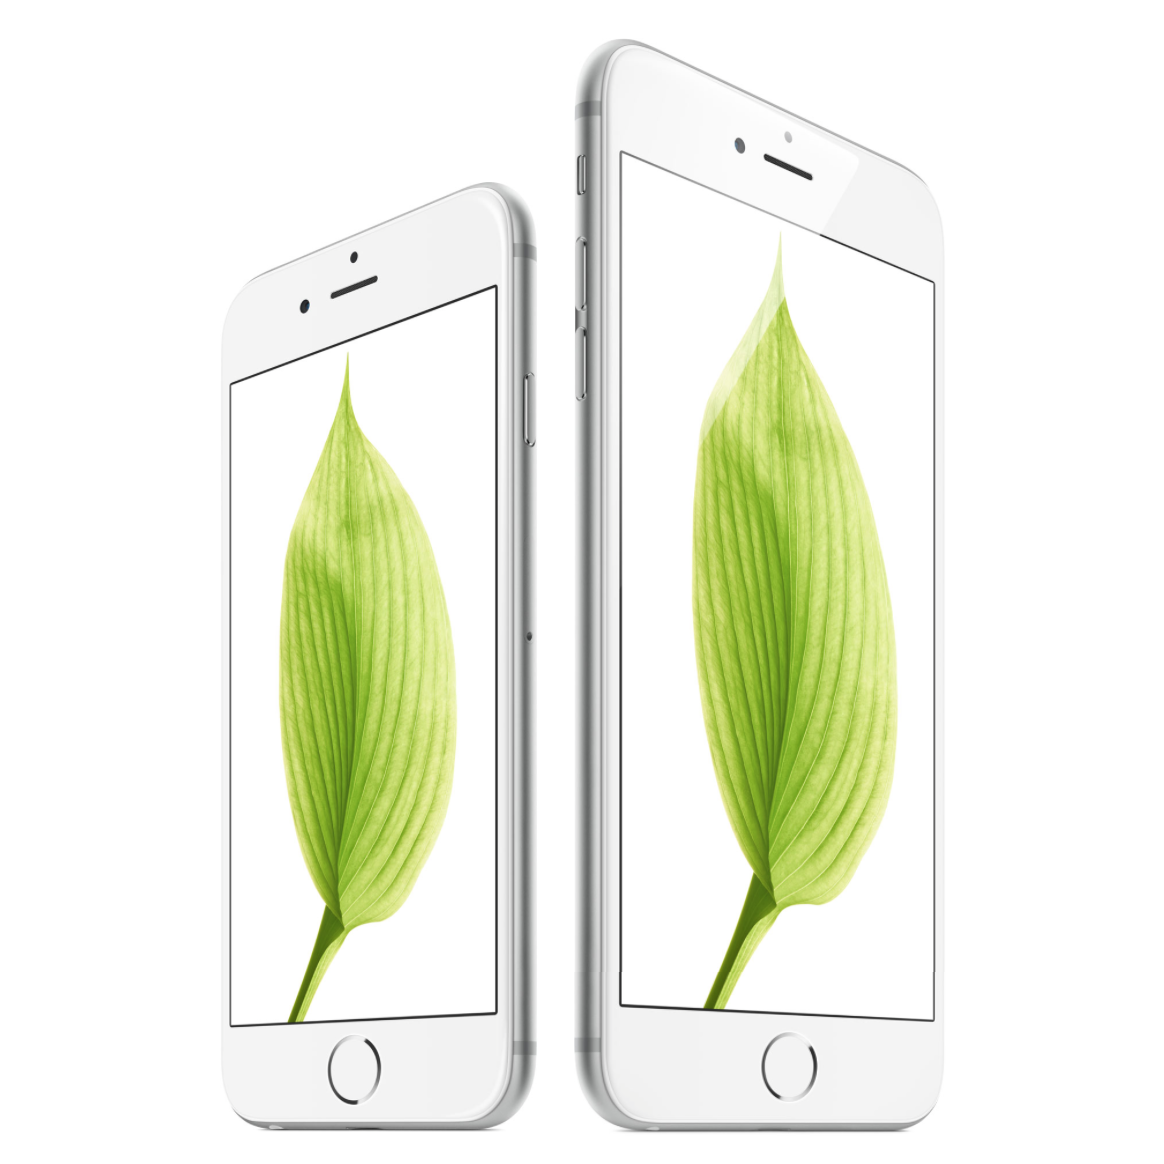 Apple &#039;iPhone 6&#039; and &#039;iPhone 6 Plus&#039; [Photo Gallery]